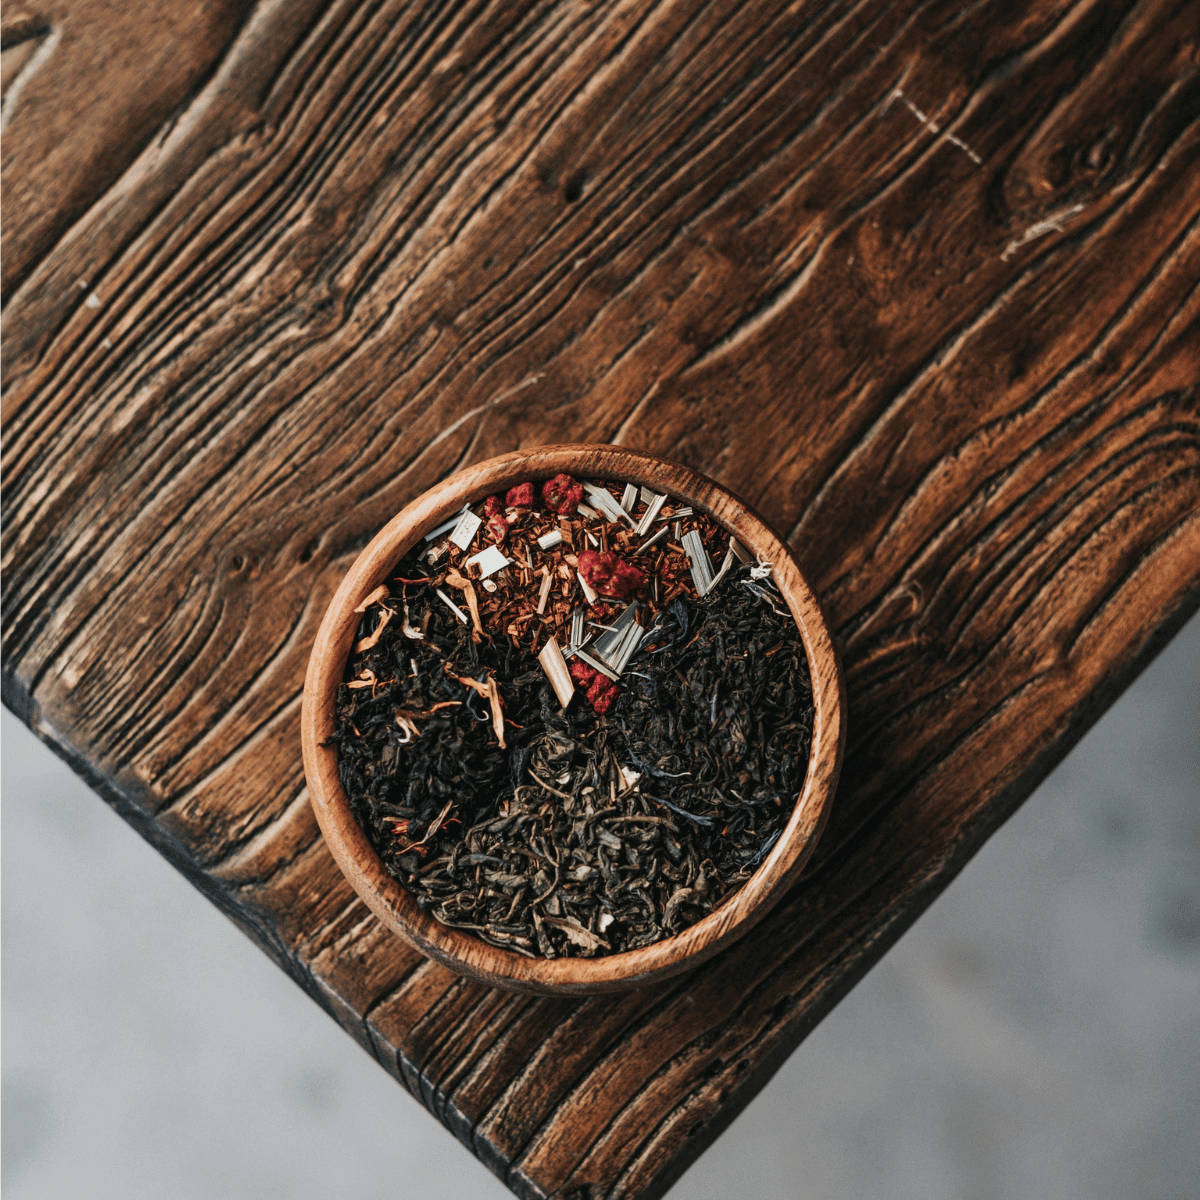 Close up of a mix of dried herbs displayed in a small wooden bowl on the corner of a wooden table